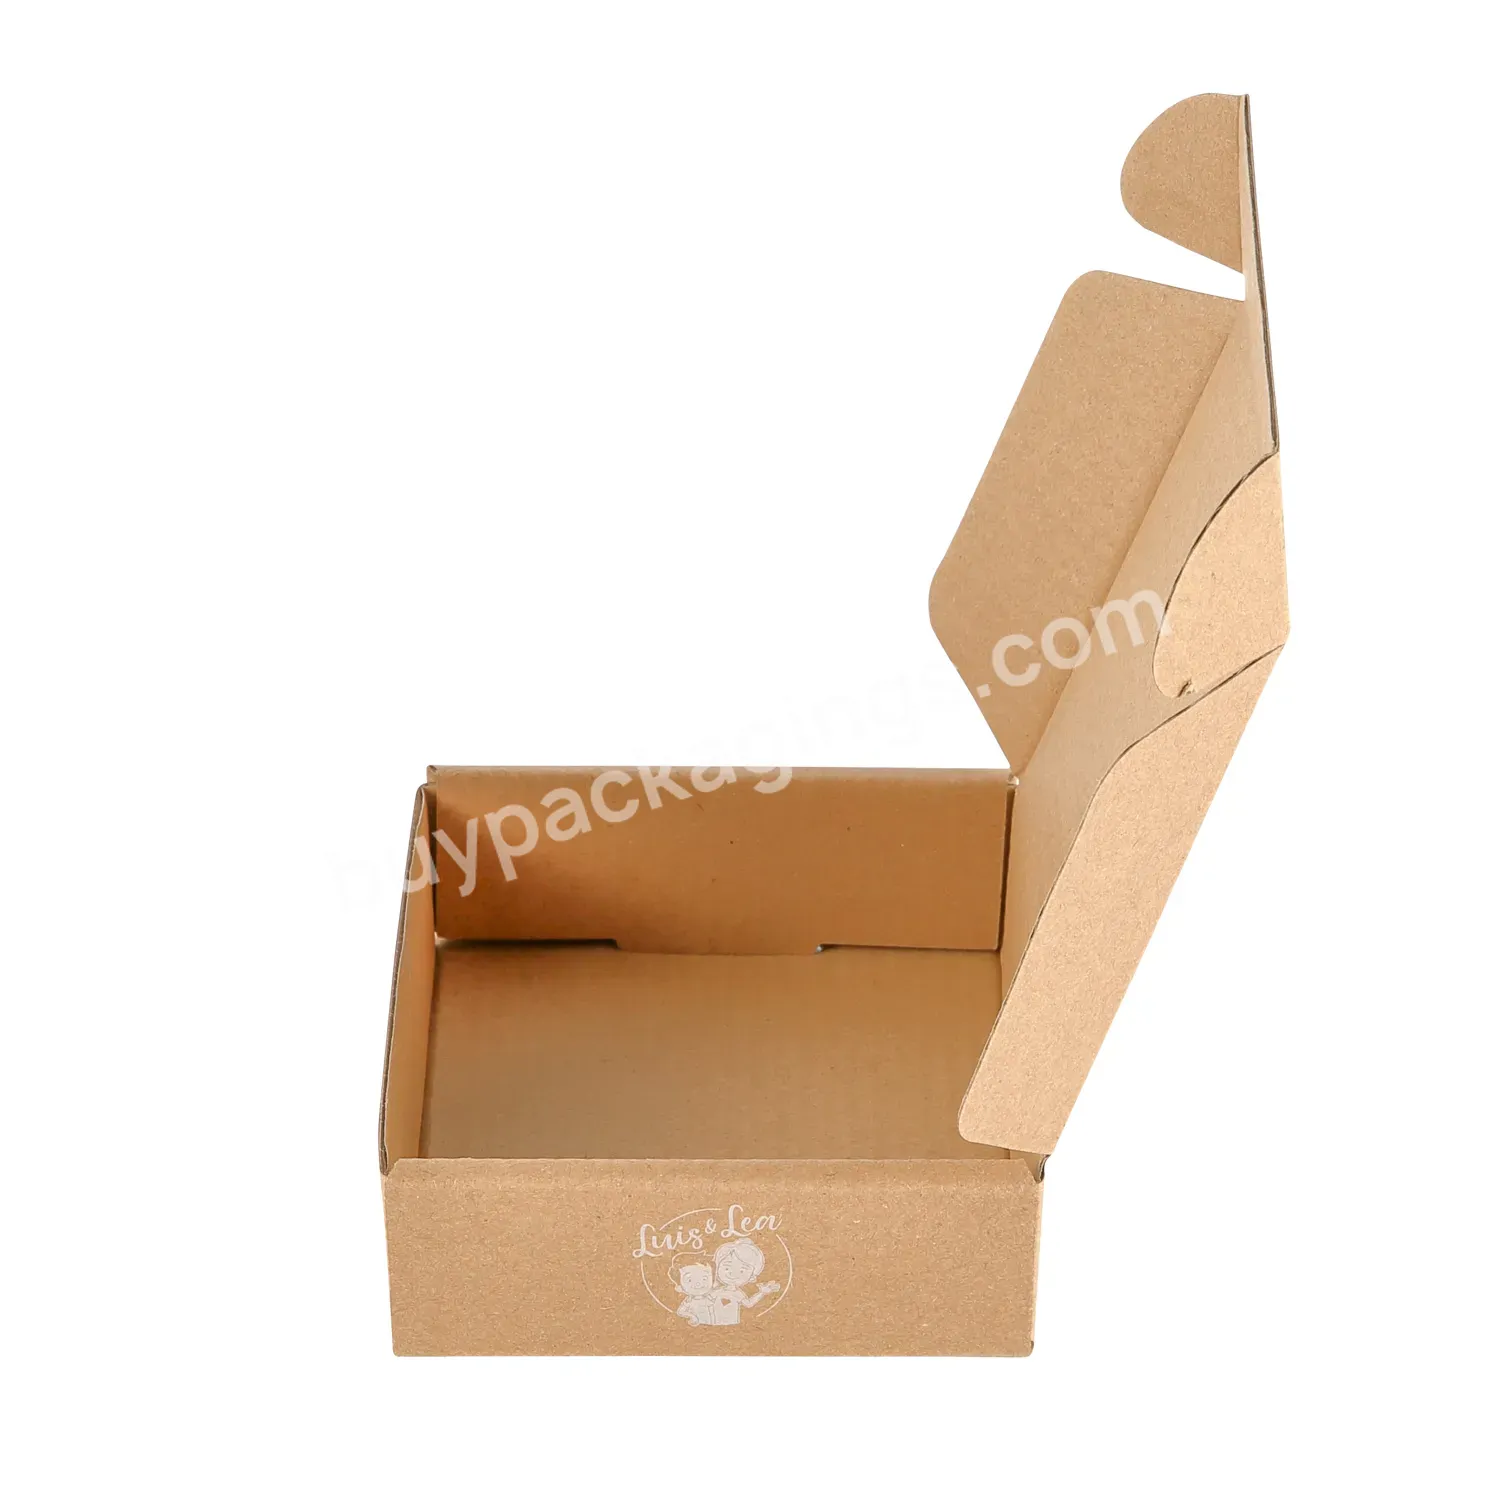 Unique Corrugated Shipping Box For Makeup Brush Paper Mailer Packaging Box For Cosmetics